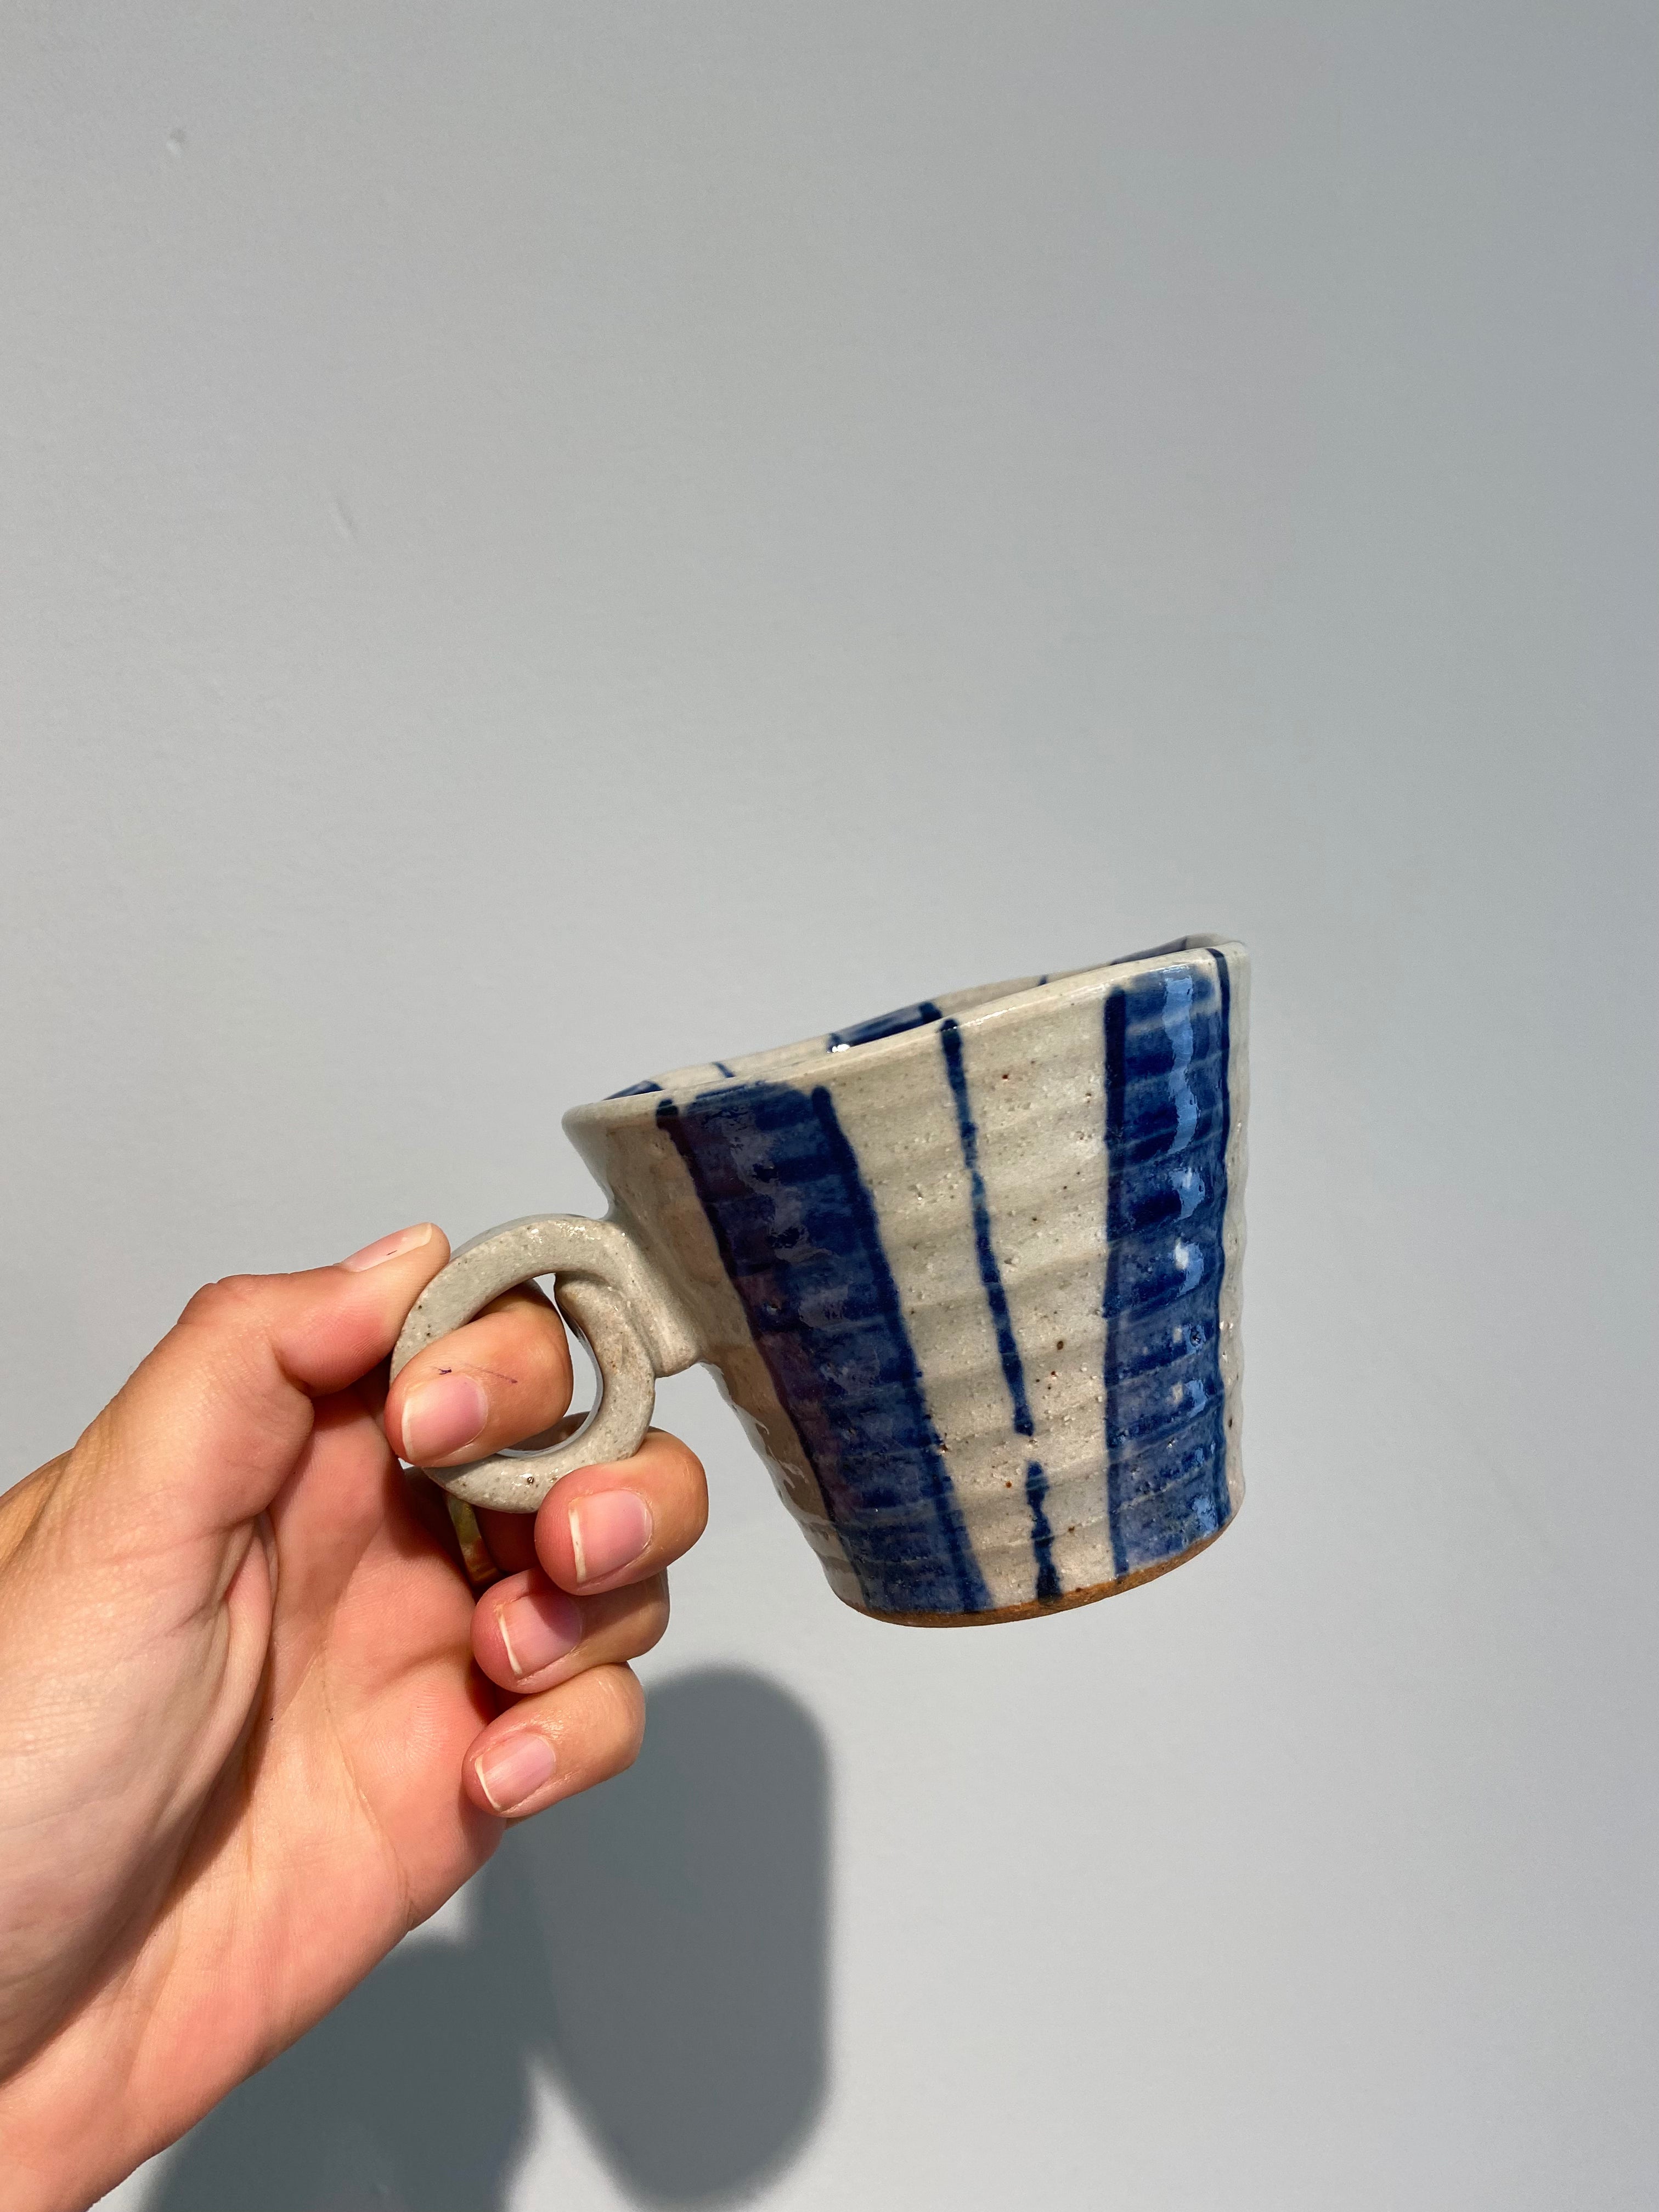 Ceramic cup with wide stripes and round handle